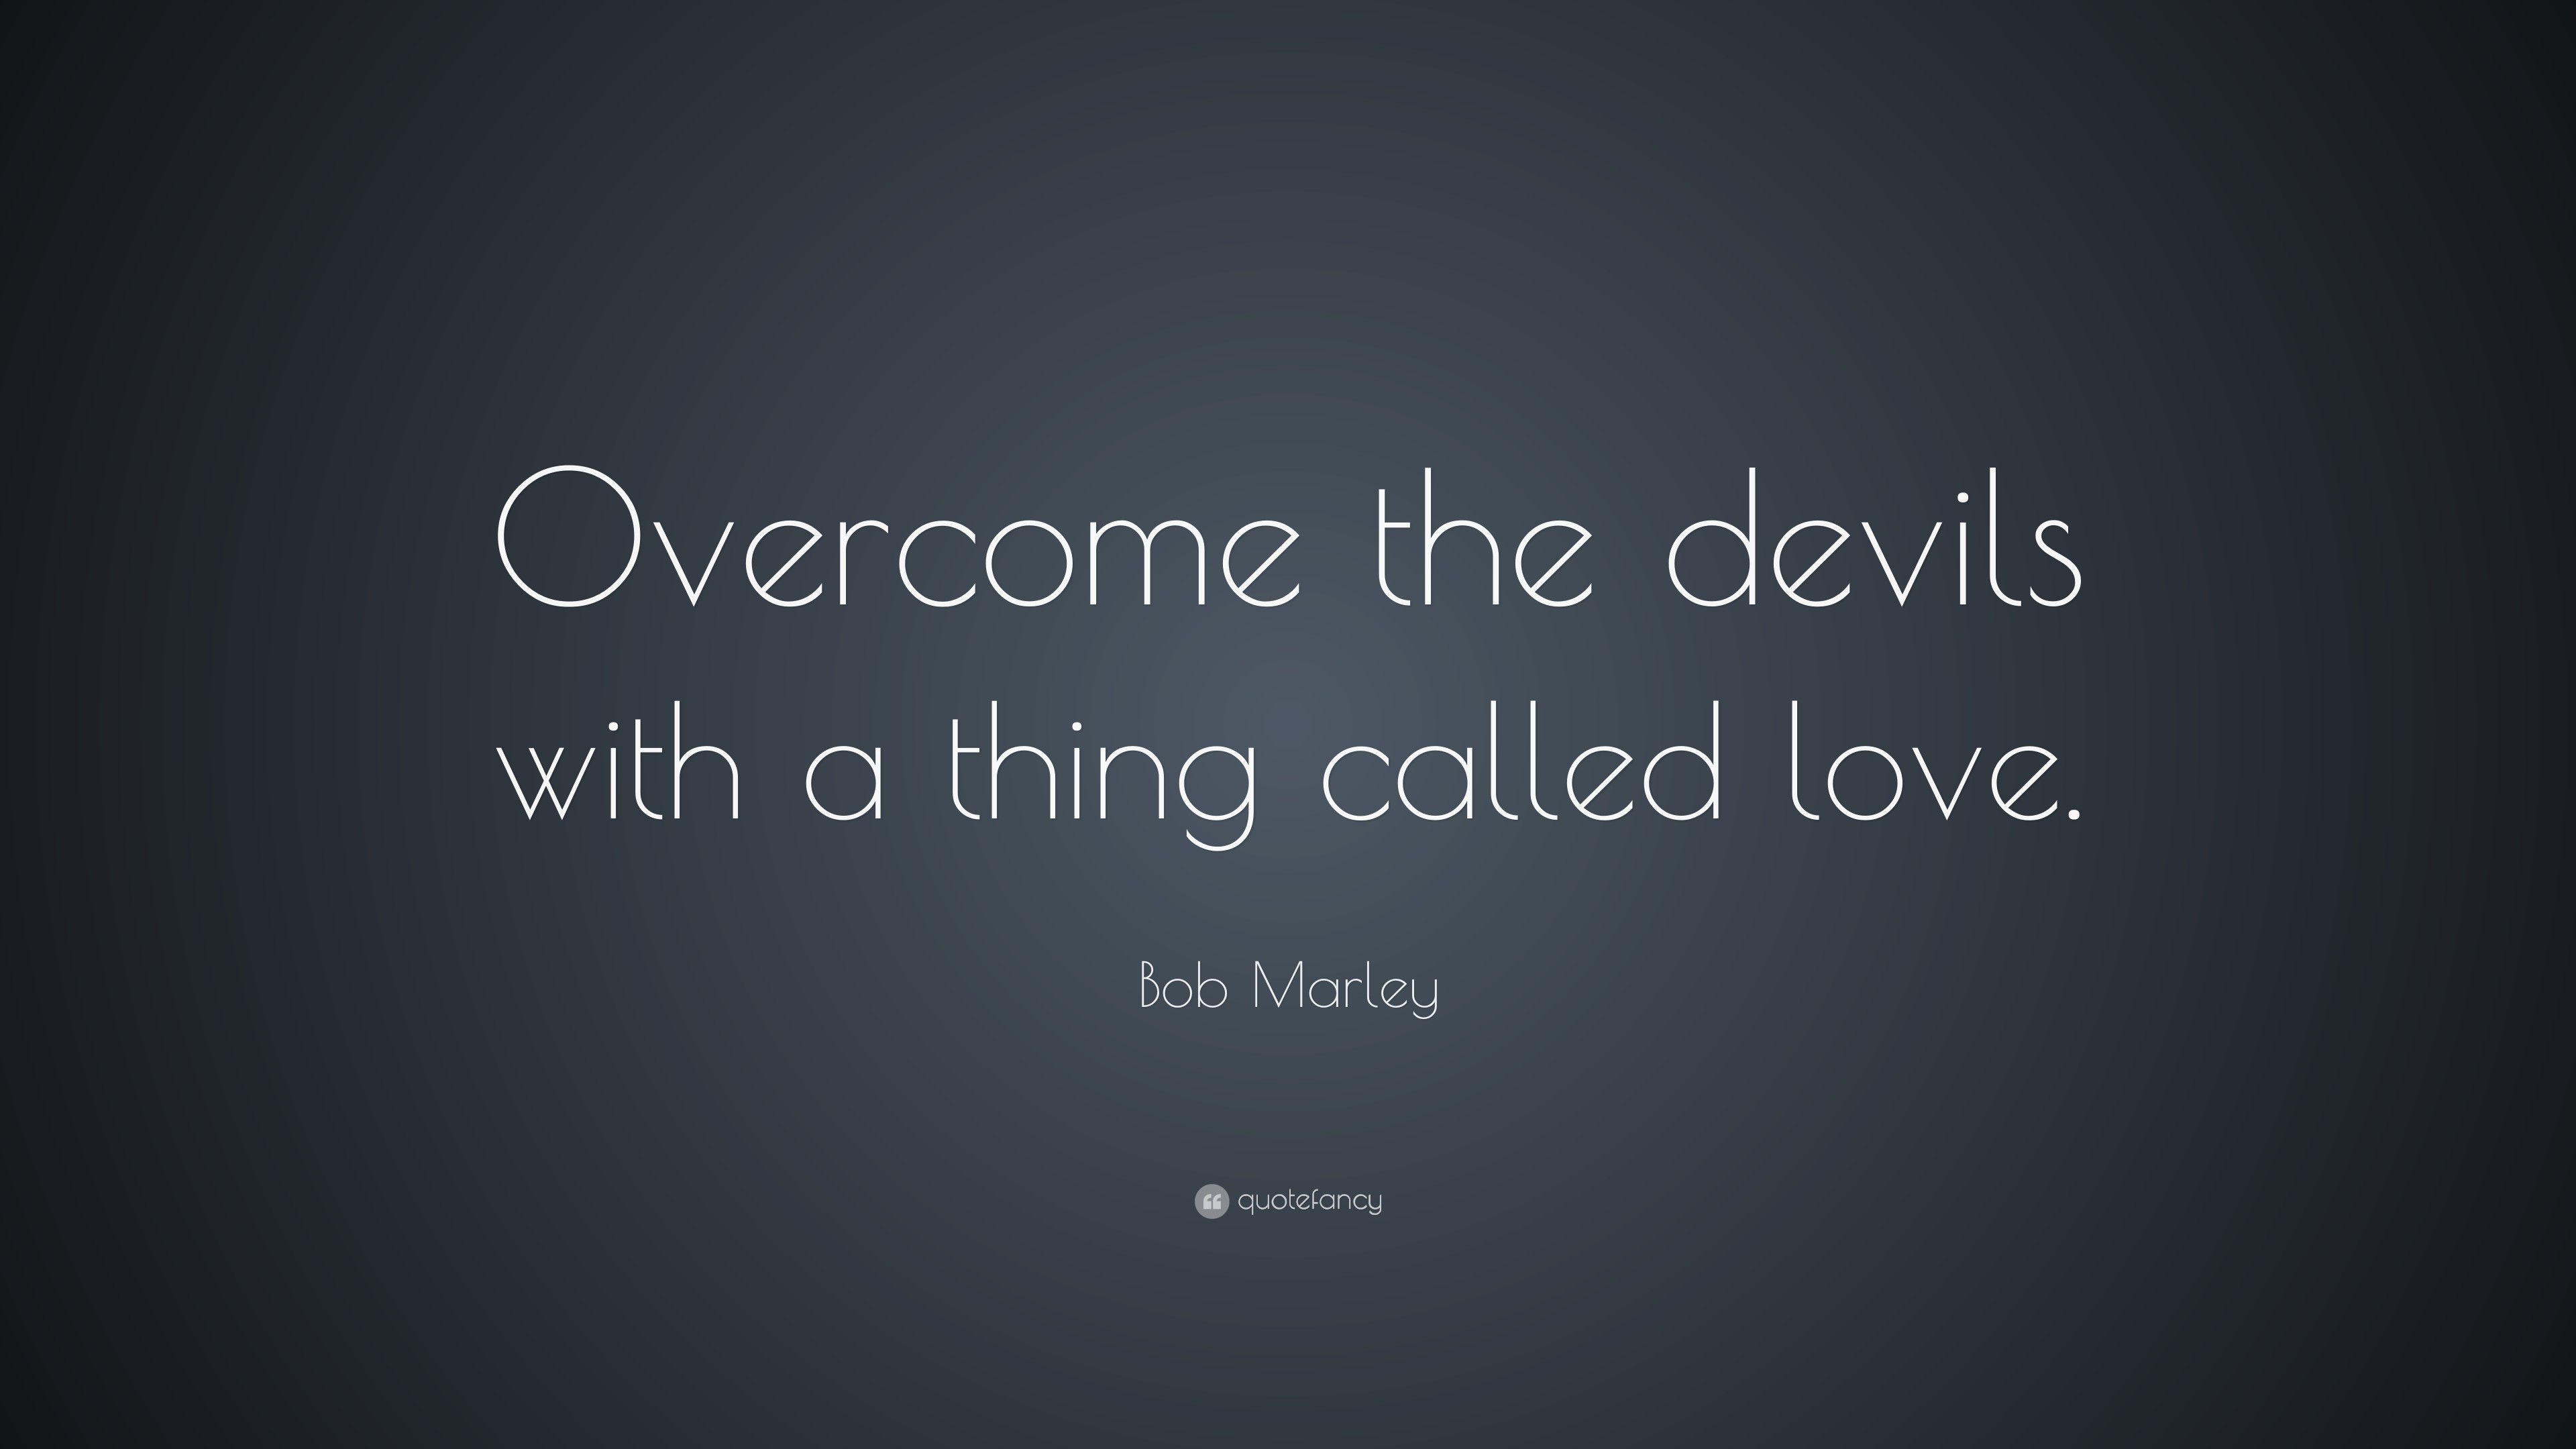 3840x2160 Bob Marley Quote: “Overcome the devils with a thing called love. ”